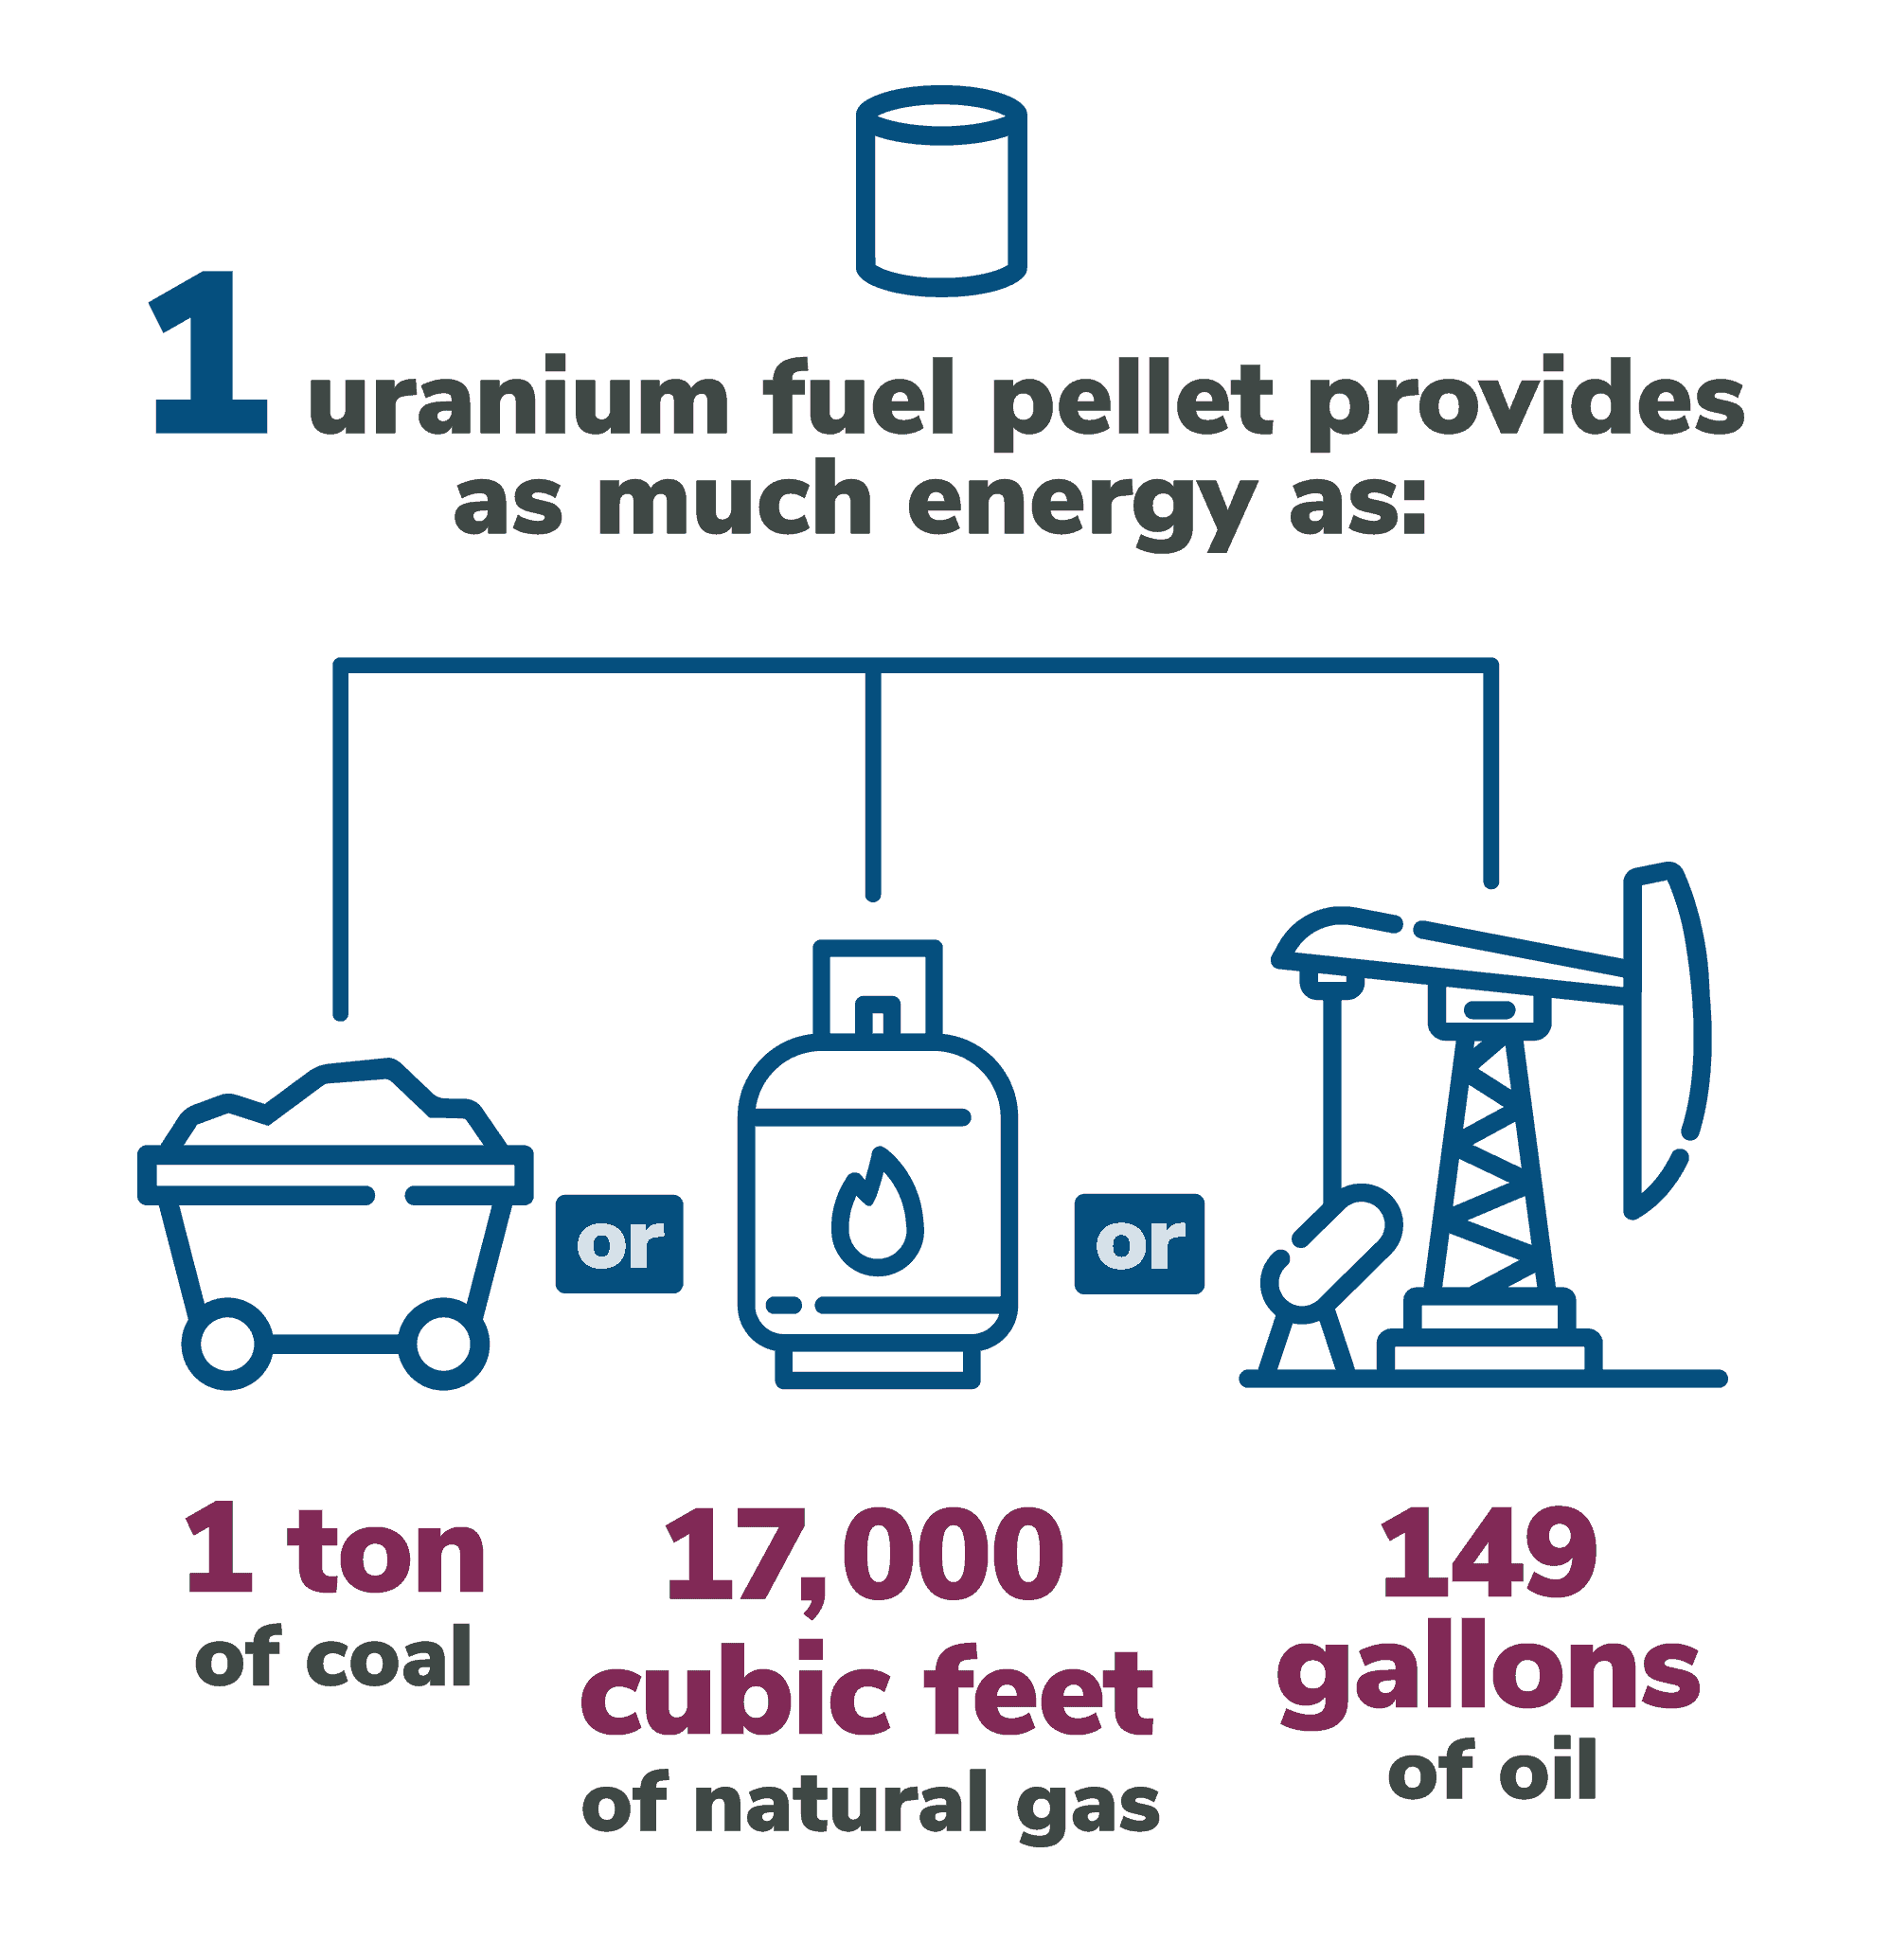 1 Uranium fuel pellet provides as much energy as 1 ton of coal, 17,000 cubic feet of natural gas, or 149 gallons of oil.